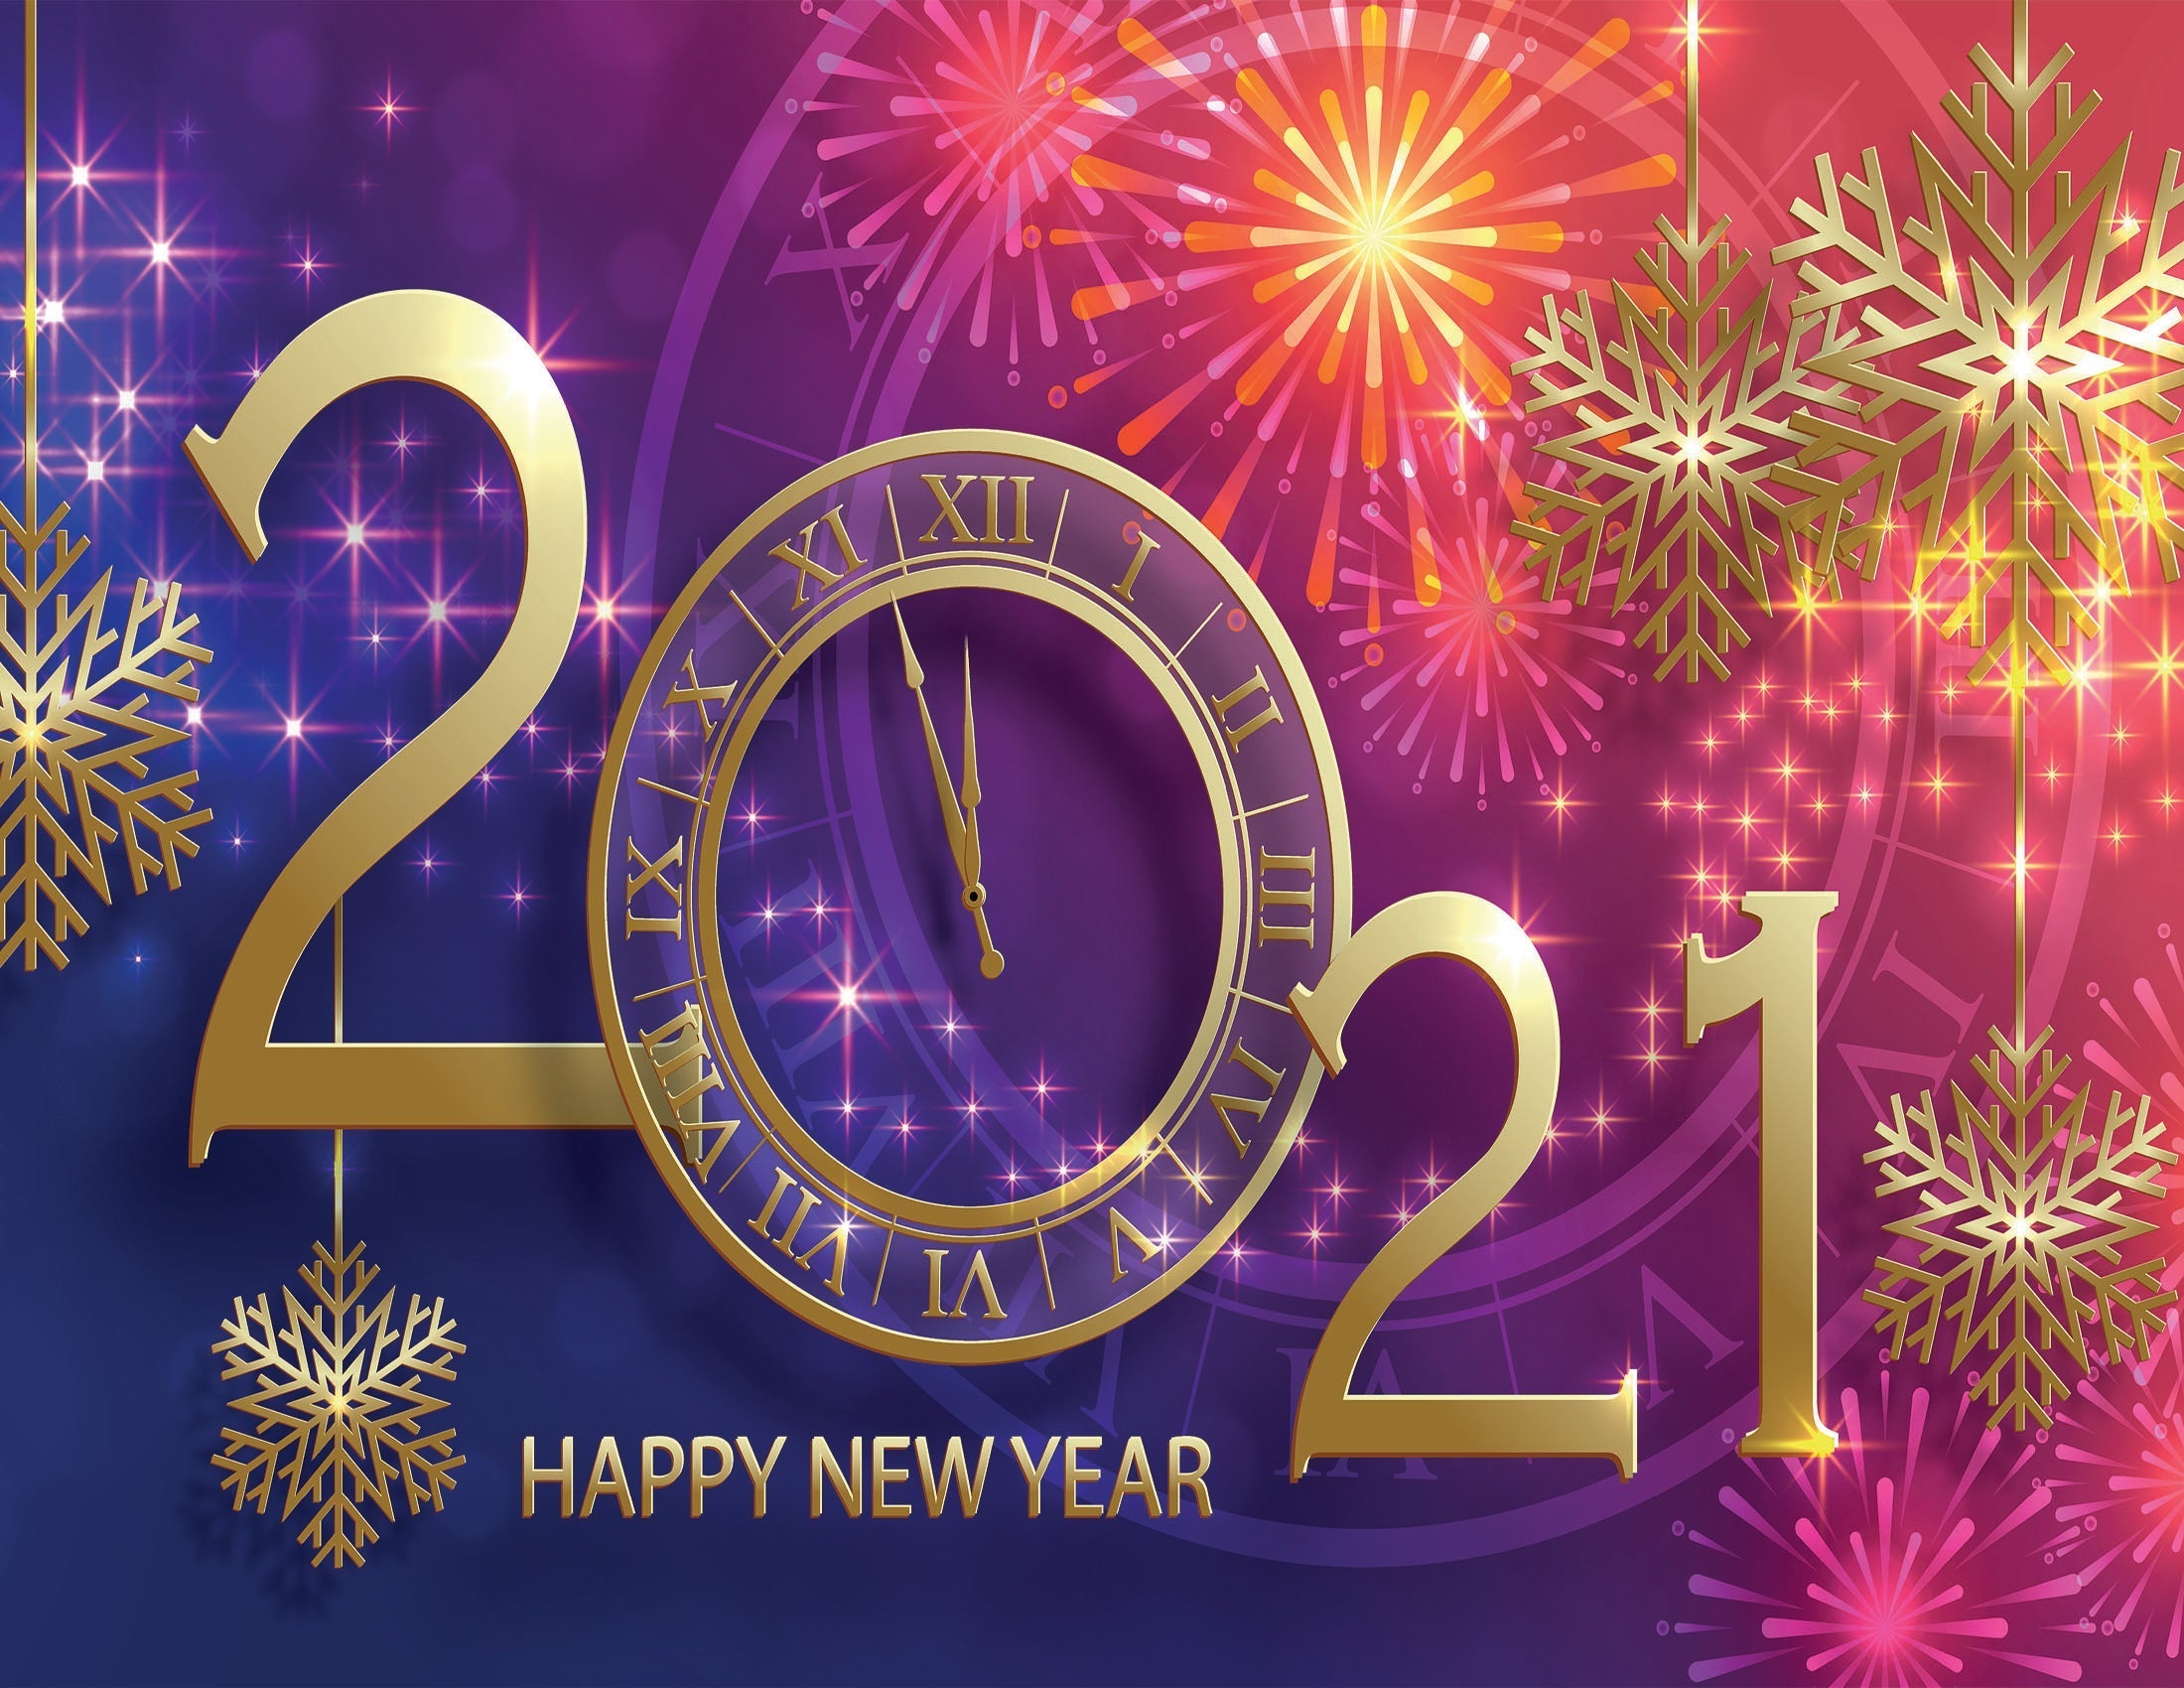 2021 Happy New Year Black Promotion Stock Vector (Royalty Free) 1704774073  | Shutterstock